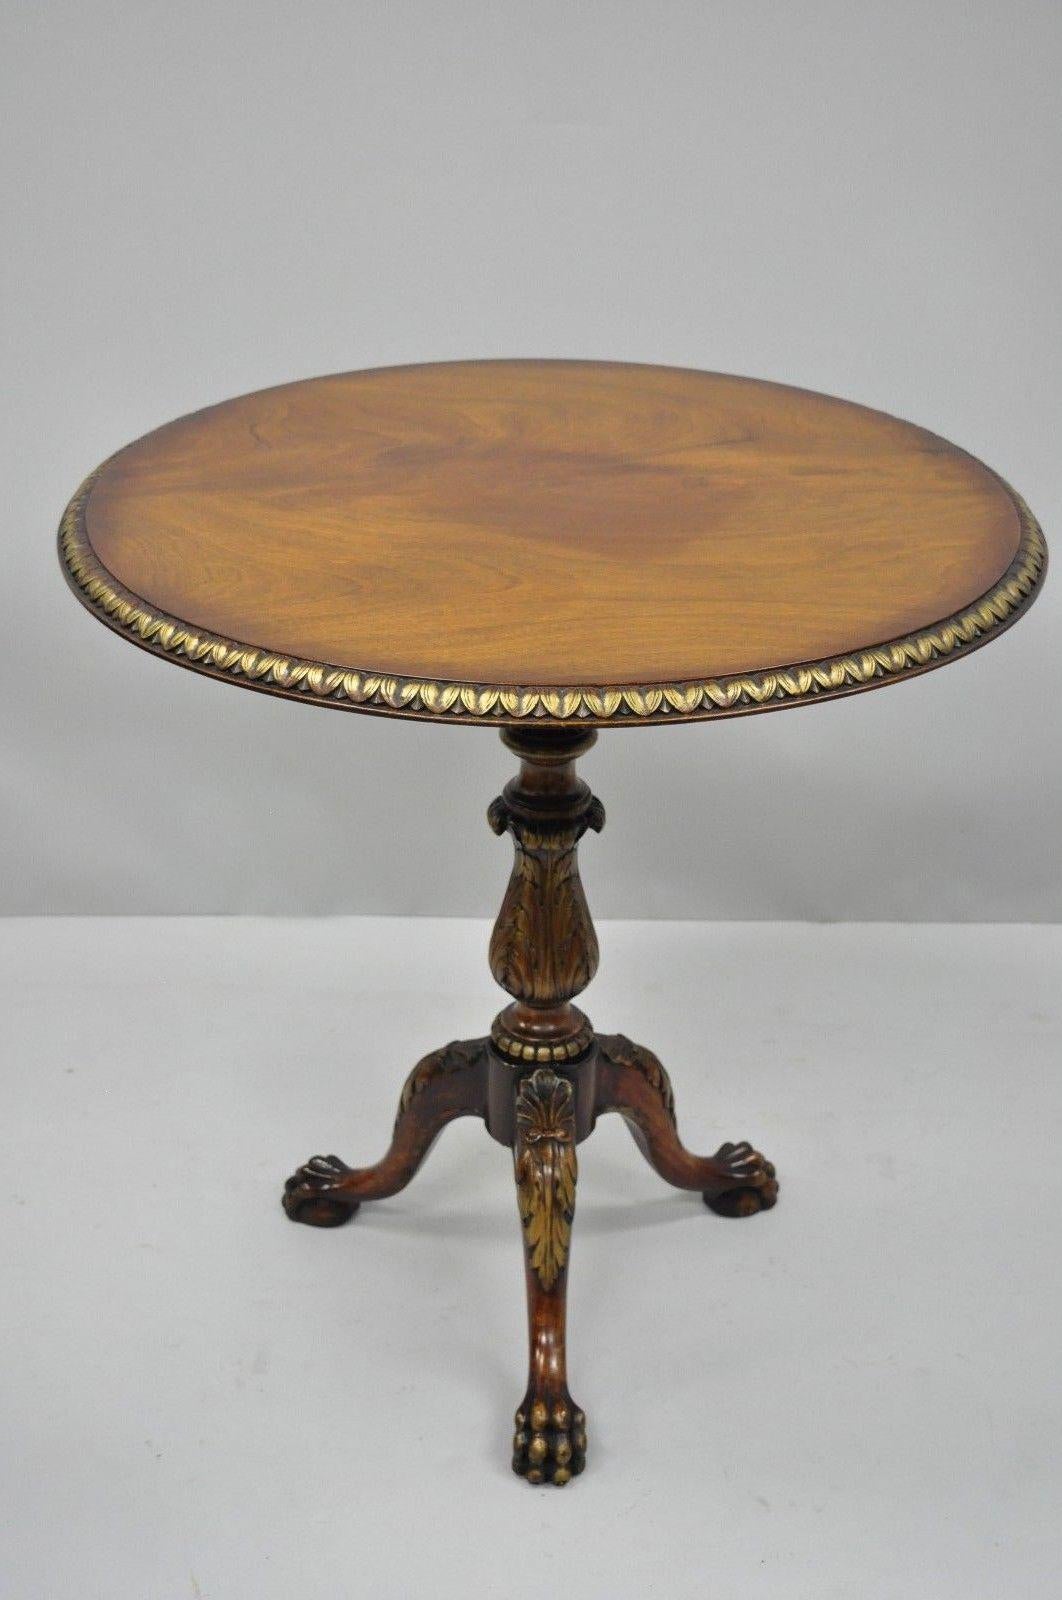 High quality vintage mahogany Chippendale style pie crust tilt-top tea table. Item features Acanthus leaf carvings, gold painted accents, shell carved knees, solid wood construction, beautiful wood grain, carved paw feet, and quality American